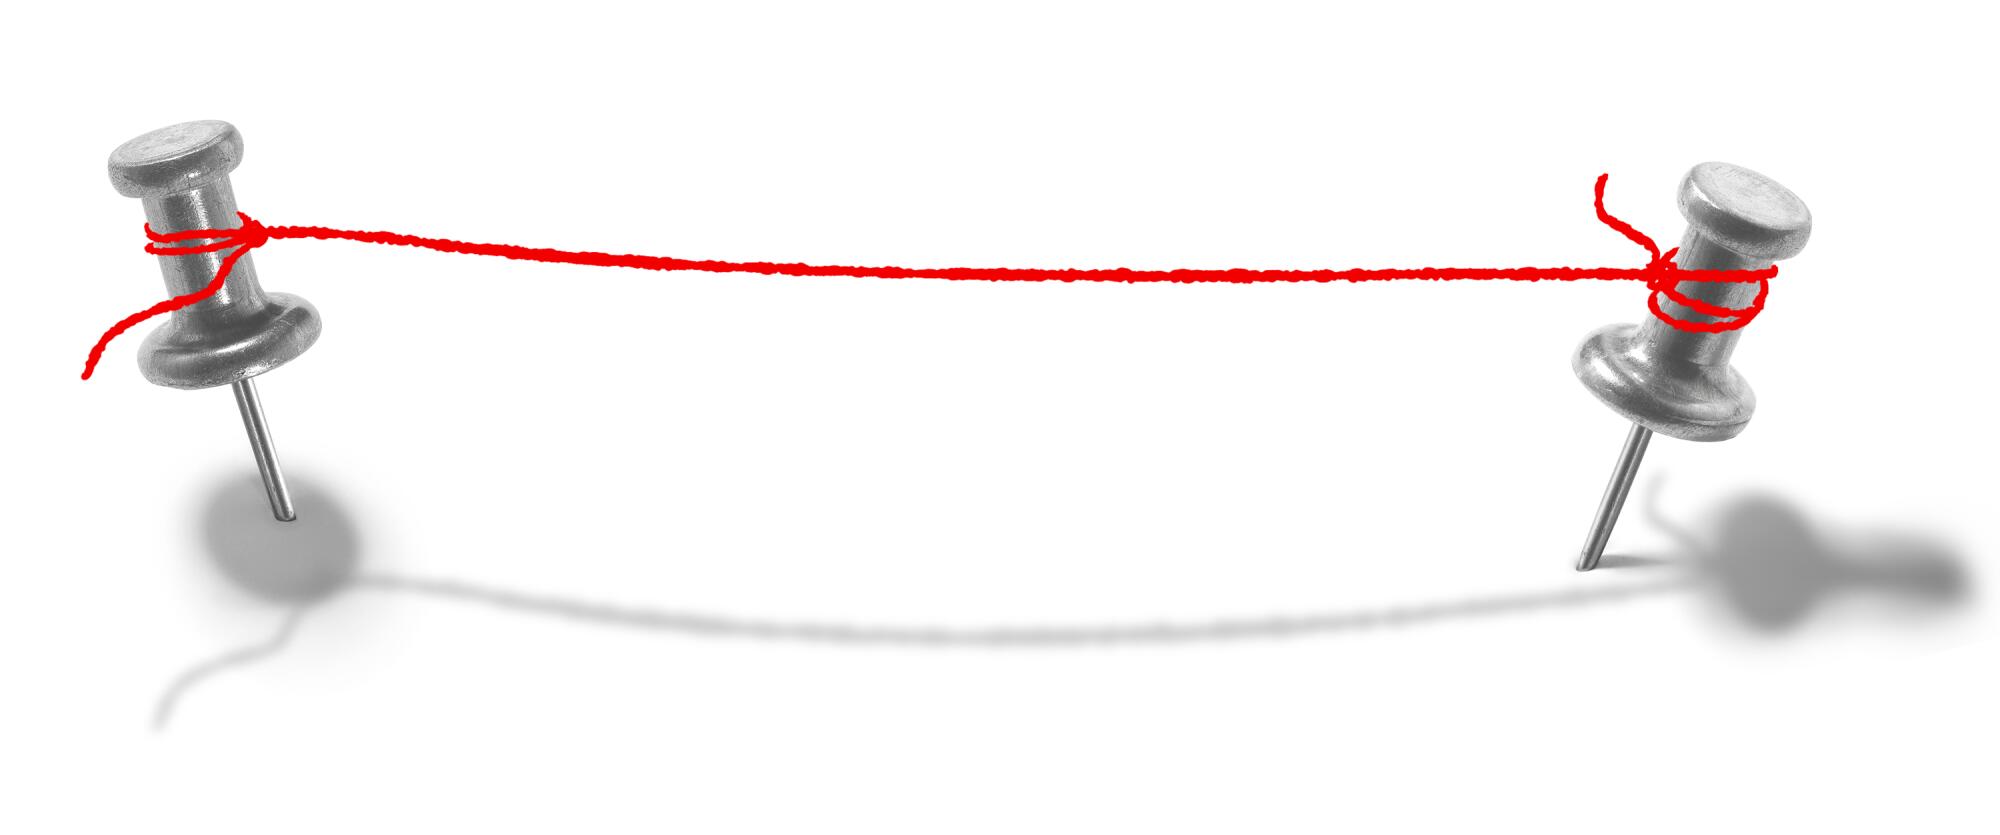 An illustration of a red string connecting two silver pushpins